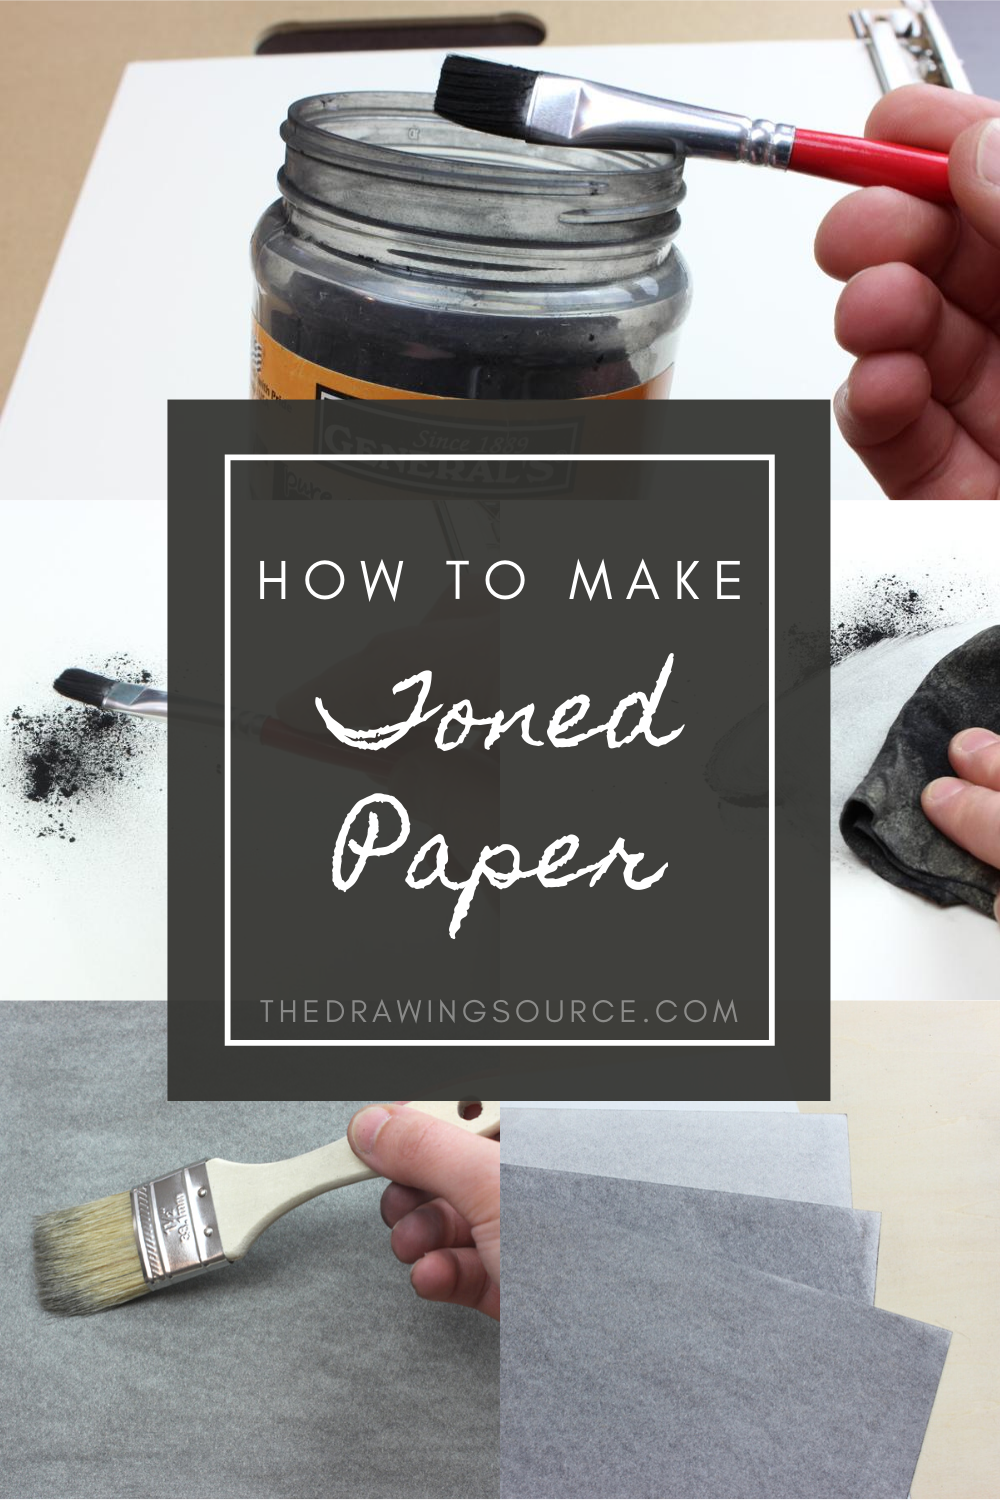 How to Make Toned Paper